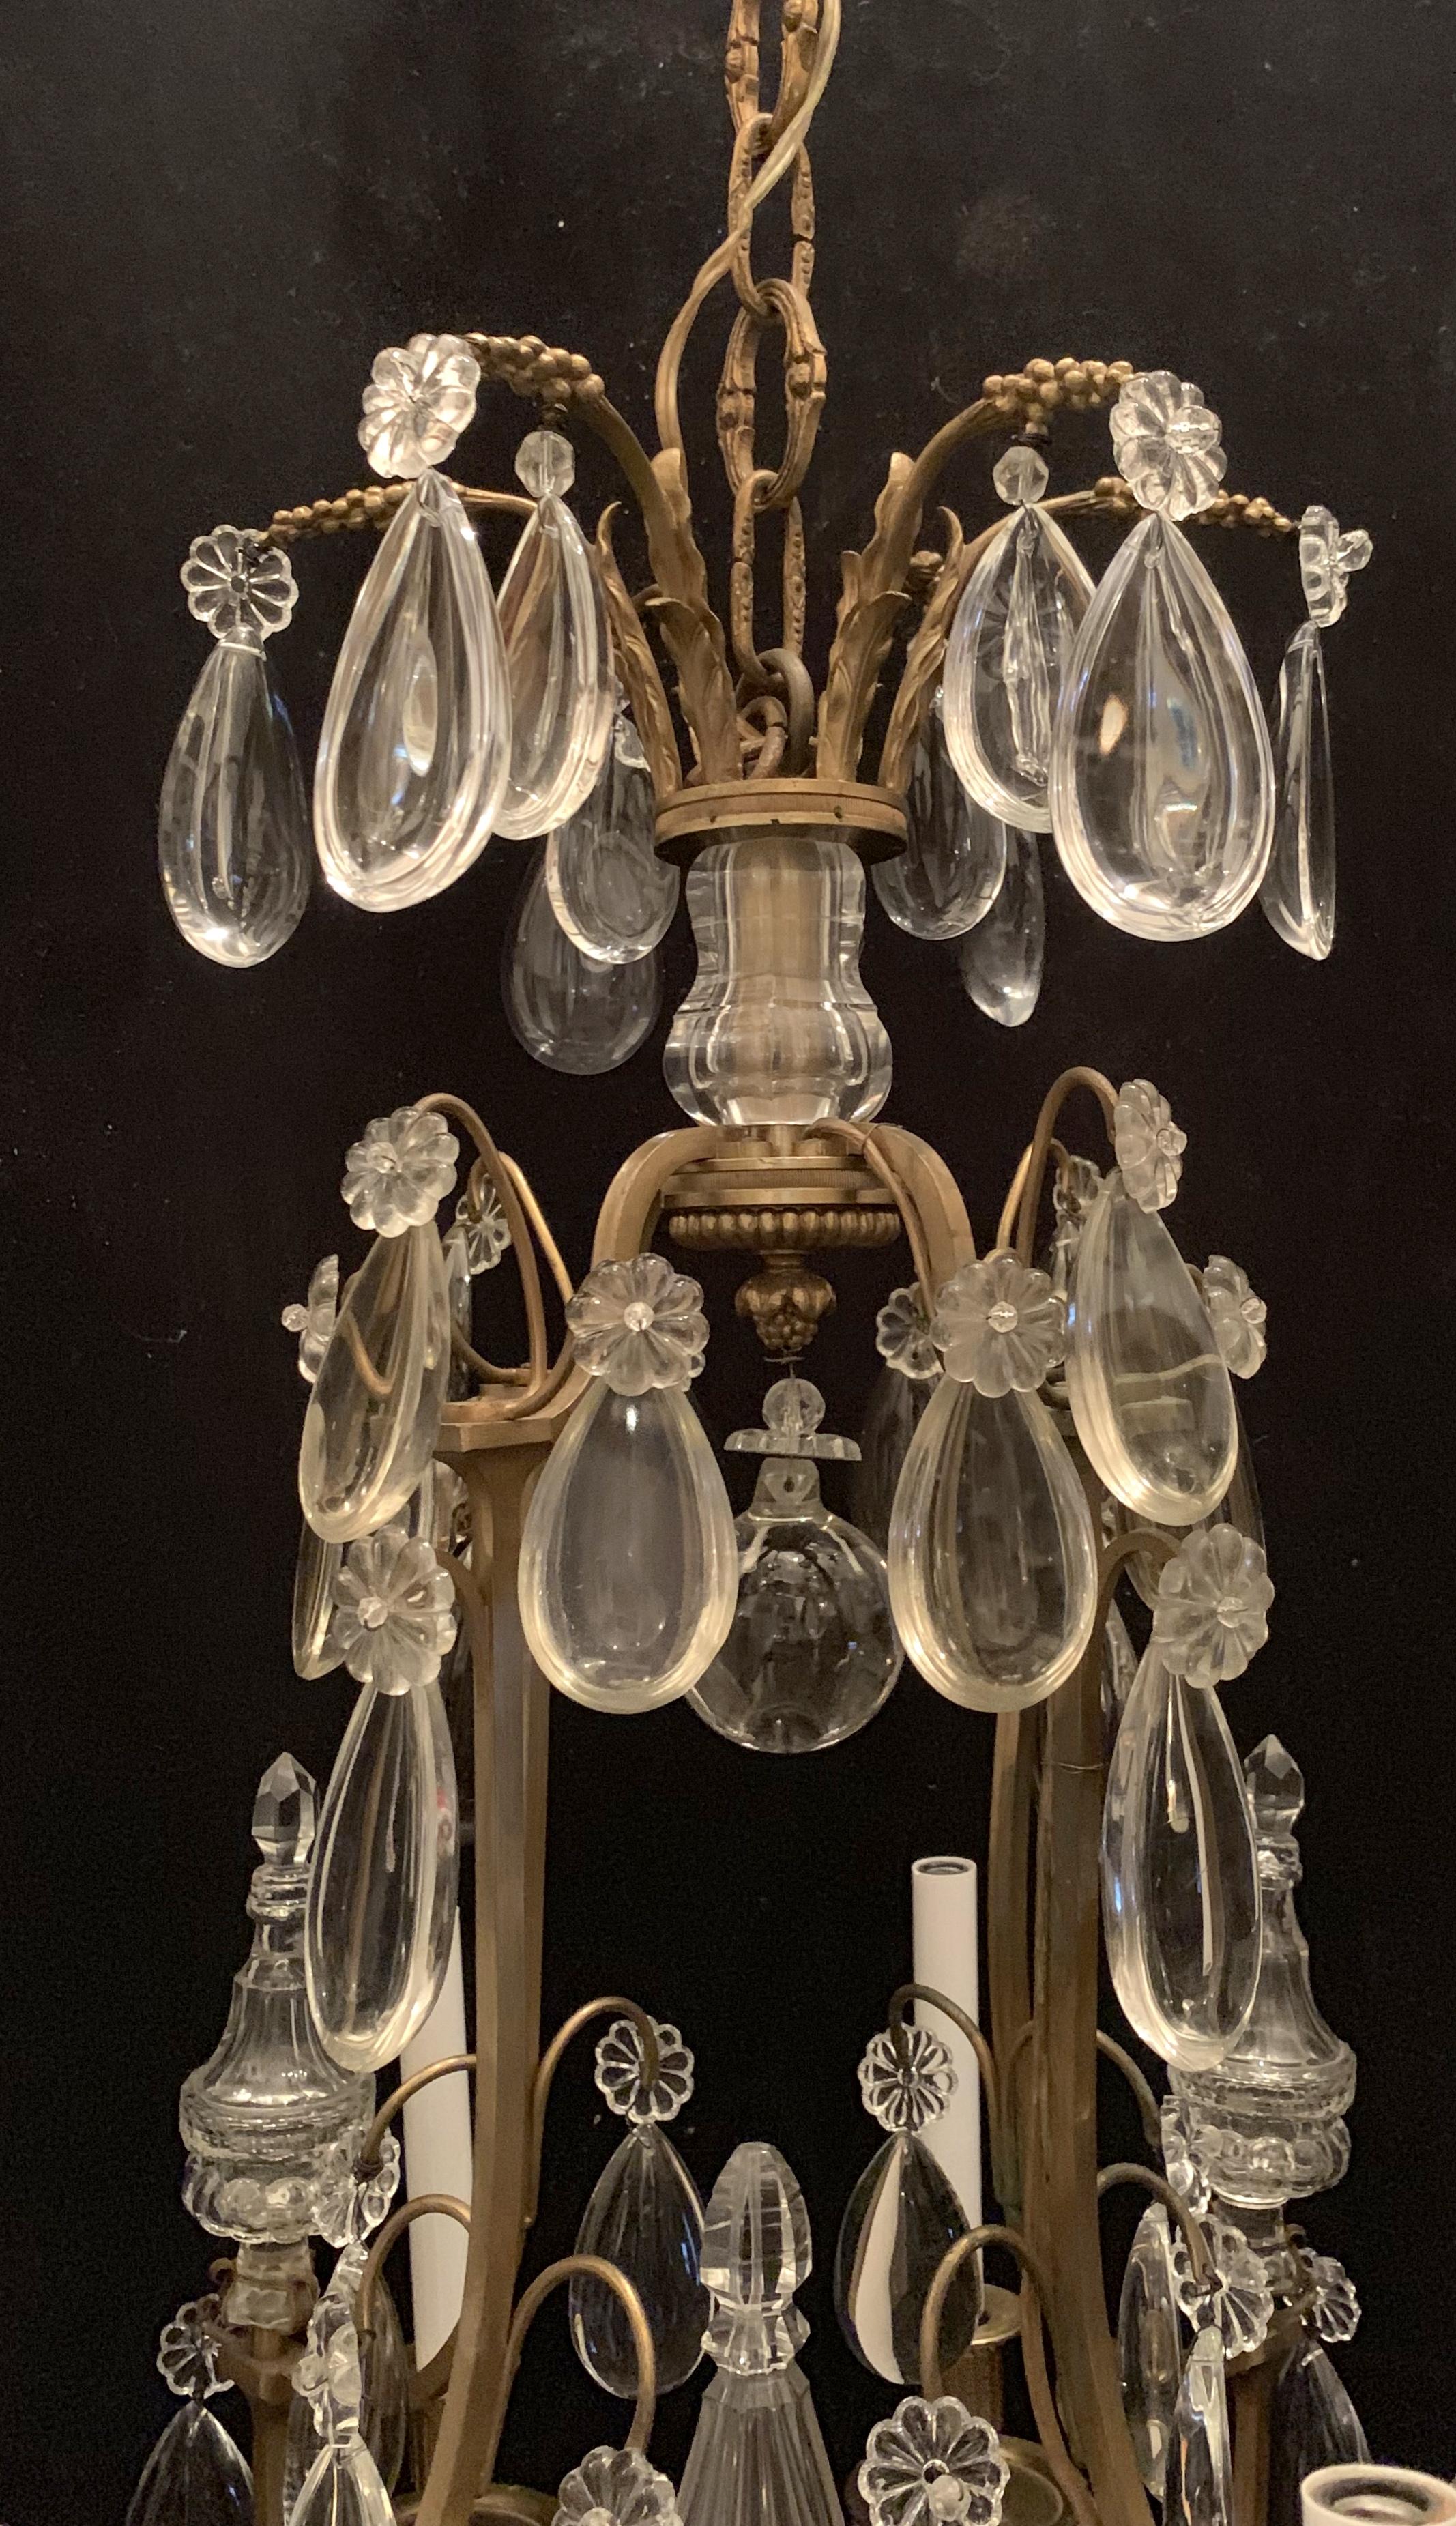 A wonderful French neoclassical bronze and crystal Regency 9-light chandelier
8 arms and center obelisk contains a light as well
Completely rewired.